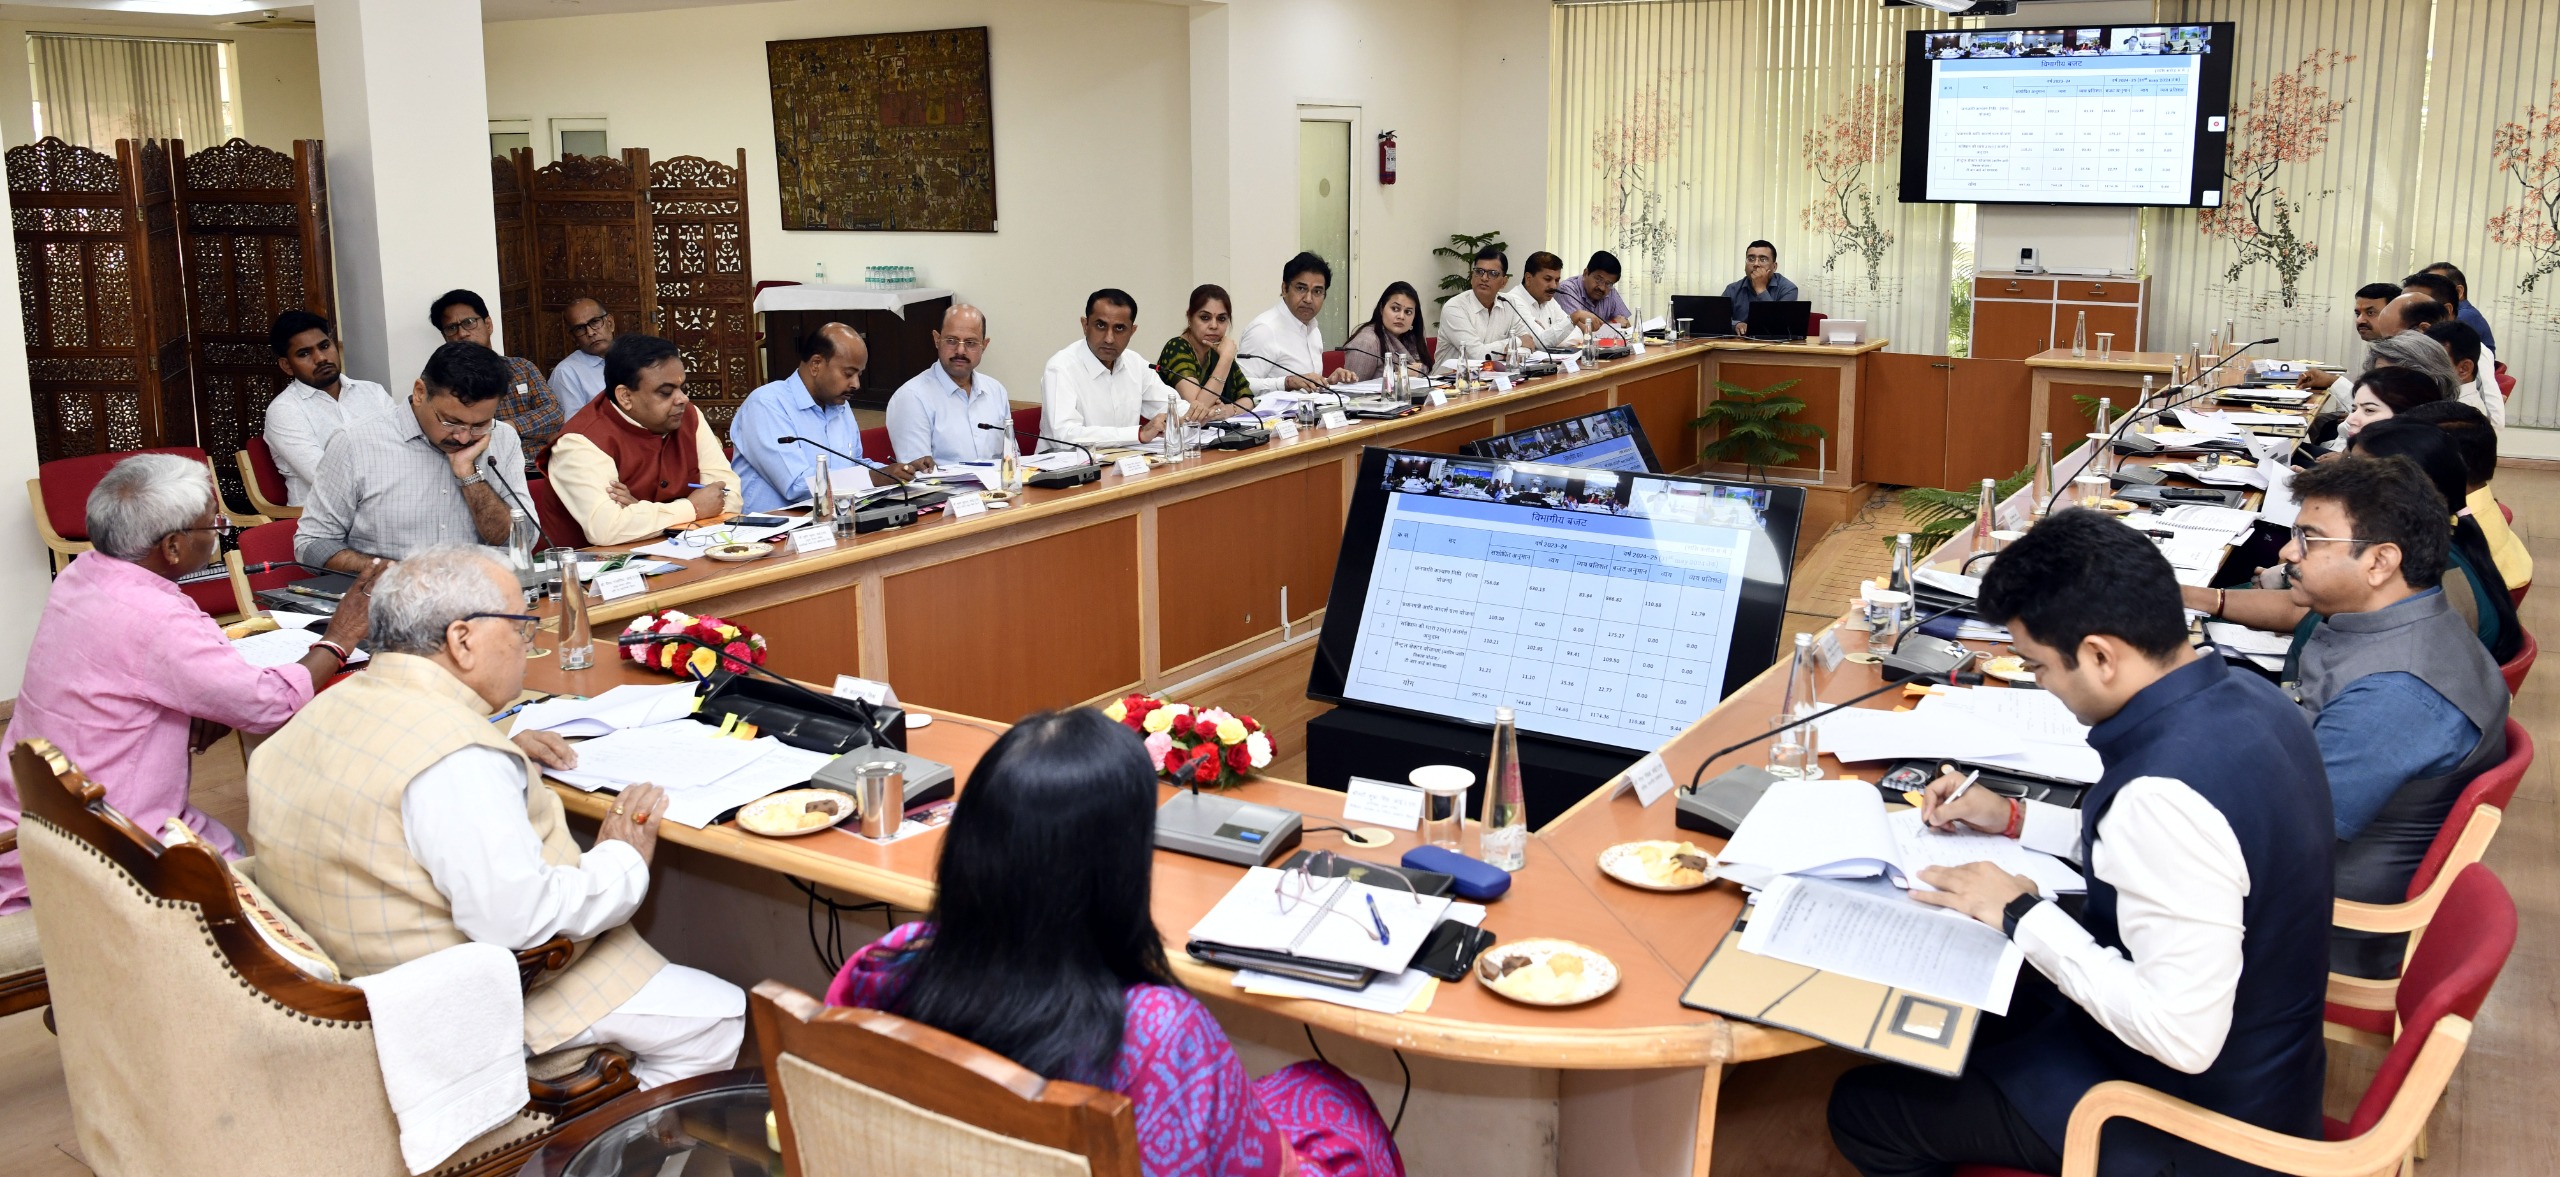 Hon'ble Governor has chaired a review meeting for ongoing process and development work at Tribal Area of Rajasthan